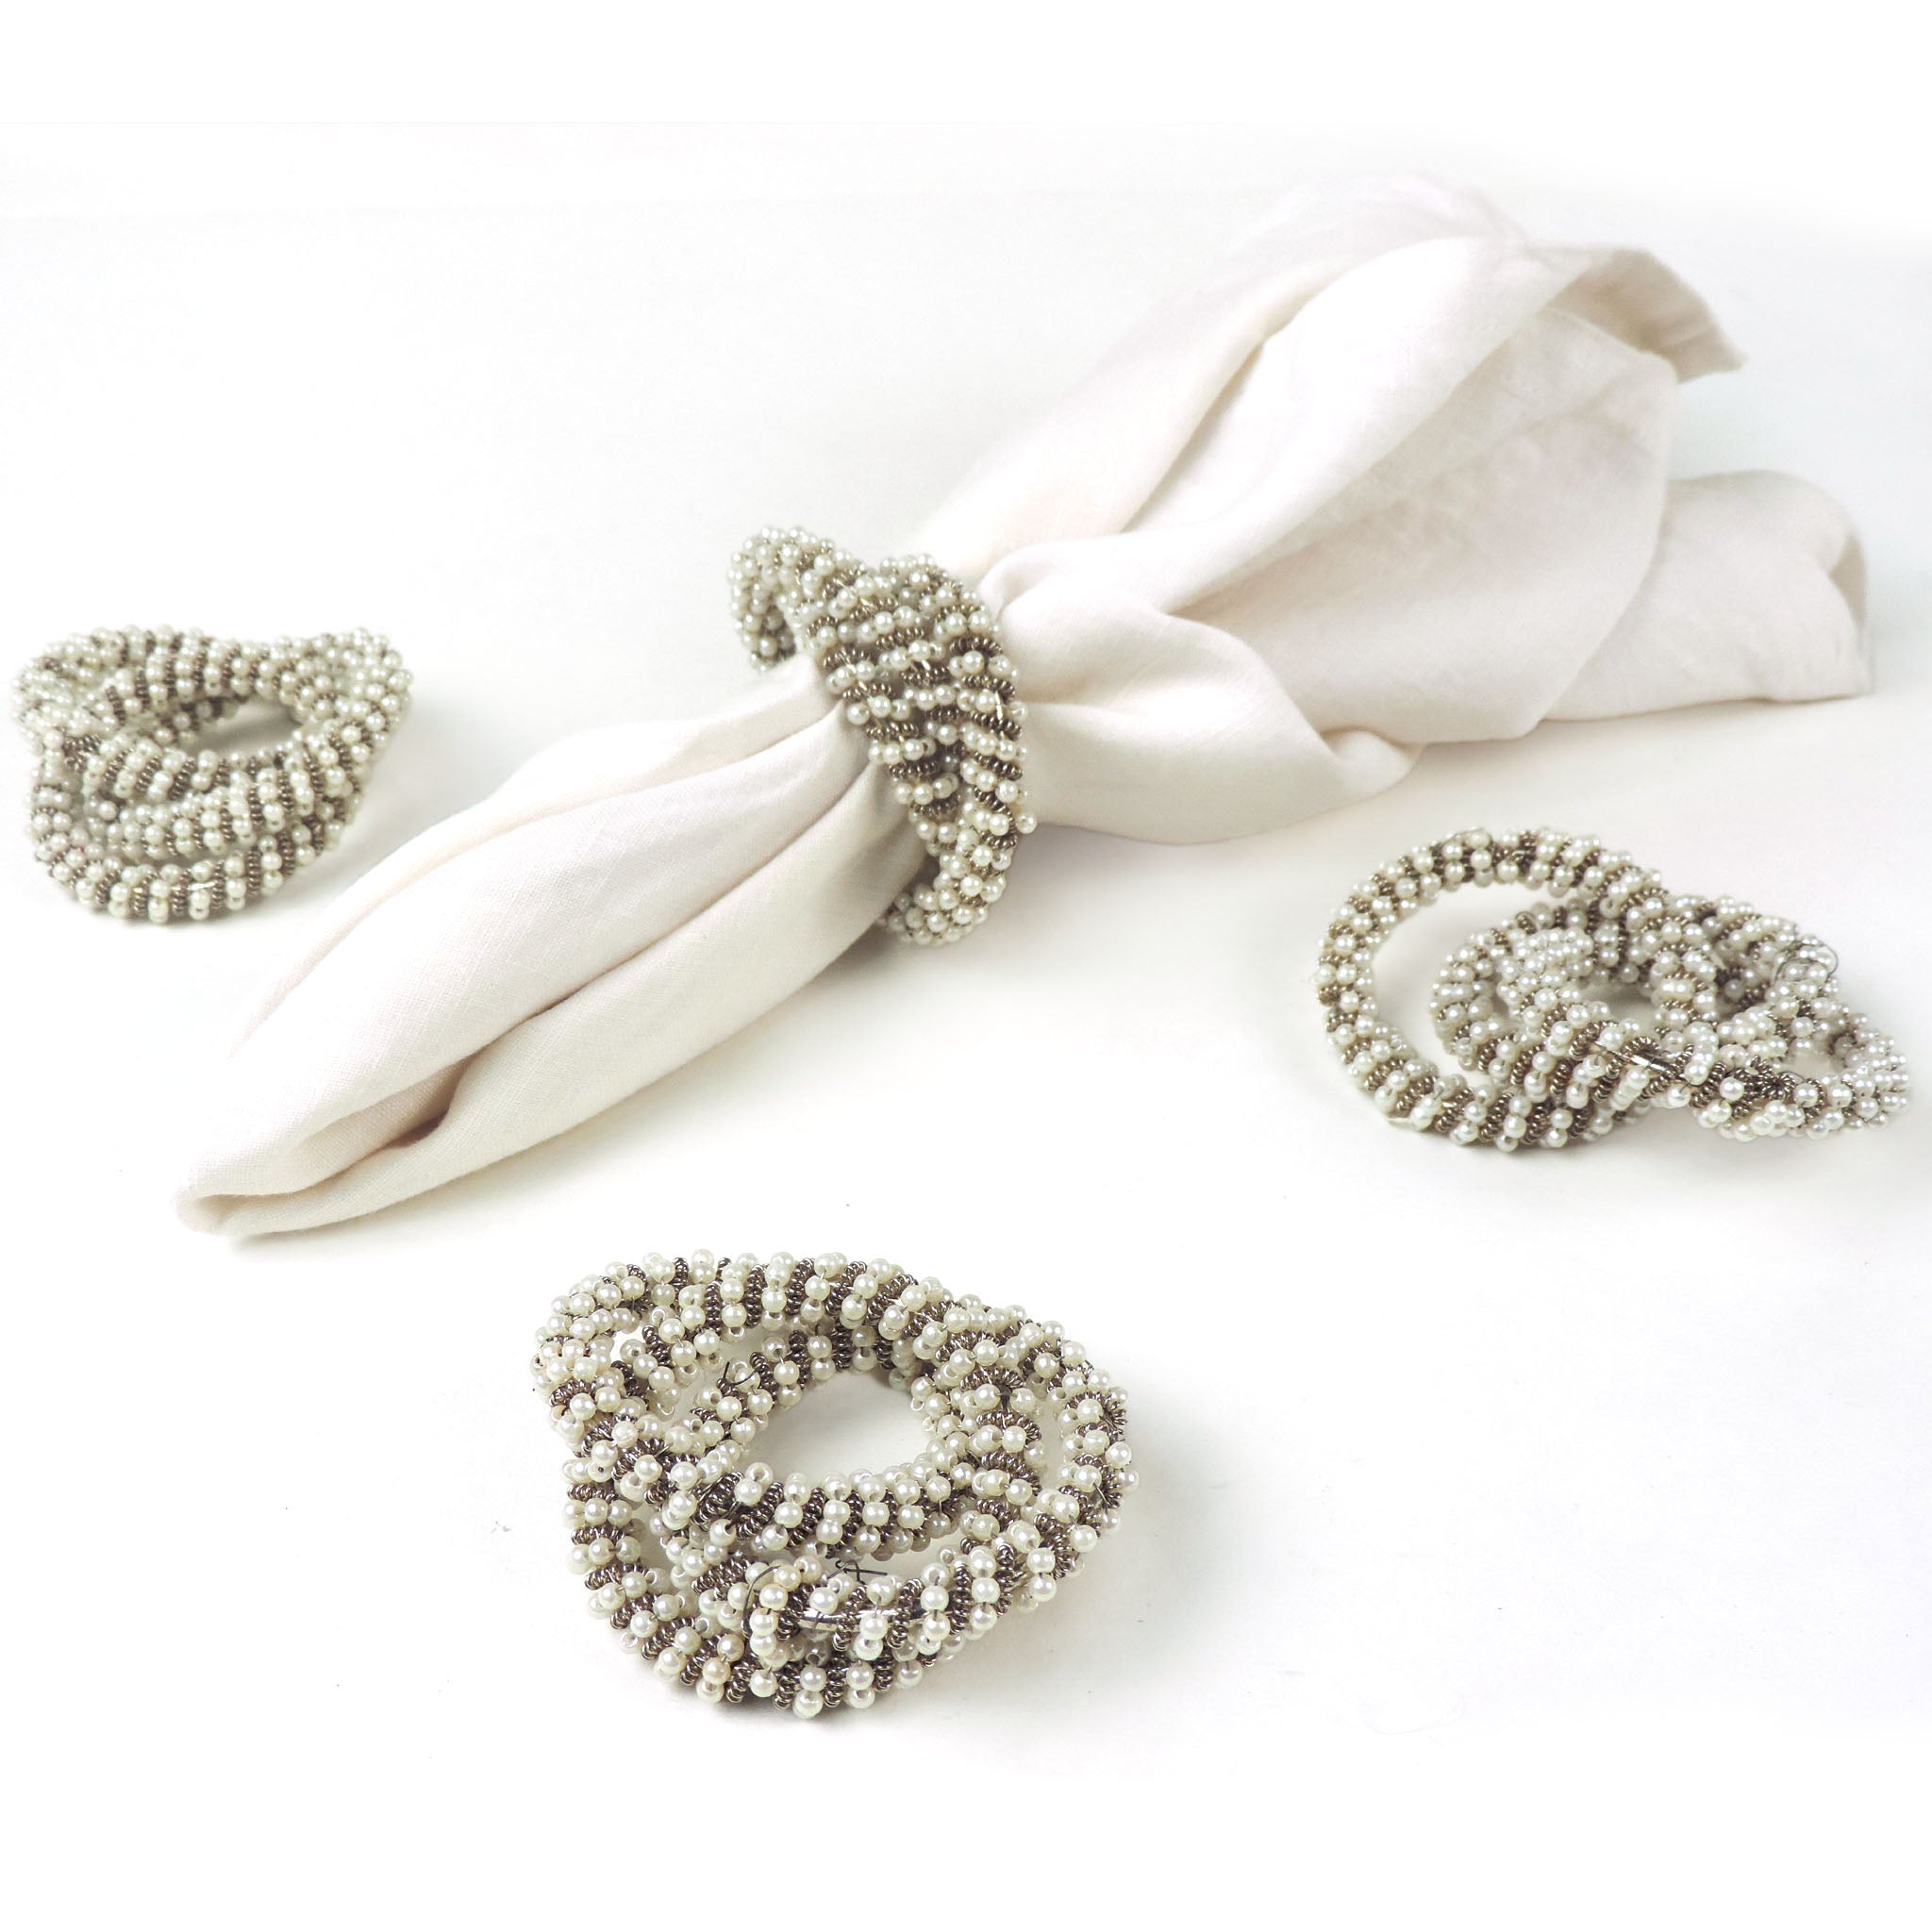 Roped Pearl Napkin Ring in White & Silver, Set of 4